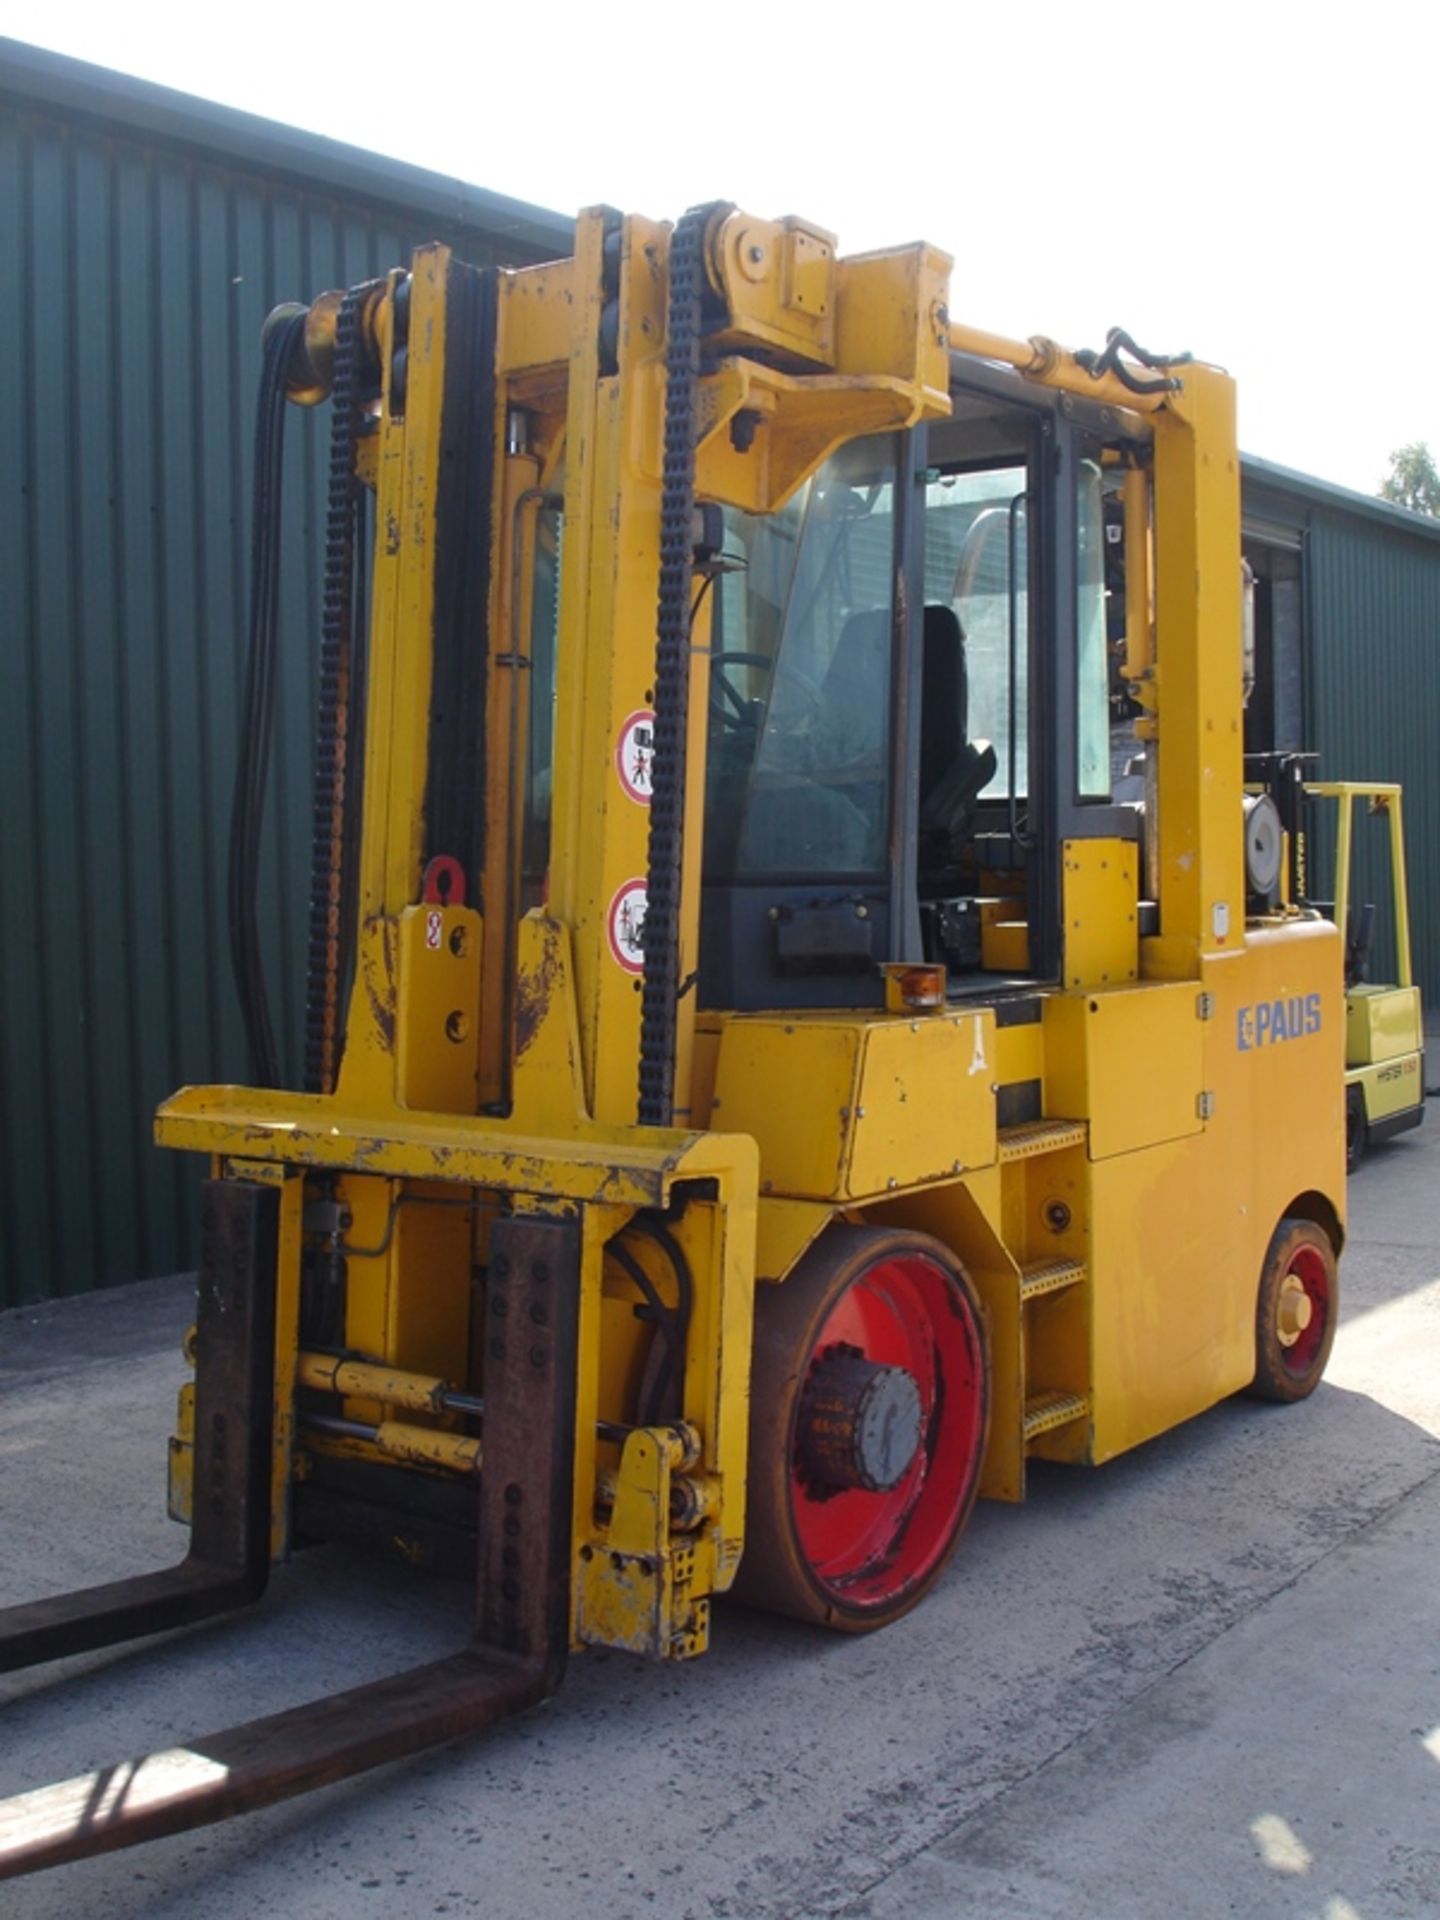 PAUS 10 ton Compact Forklift - Image 5 of 8